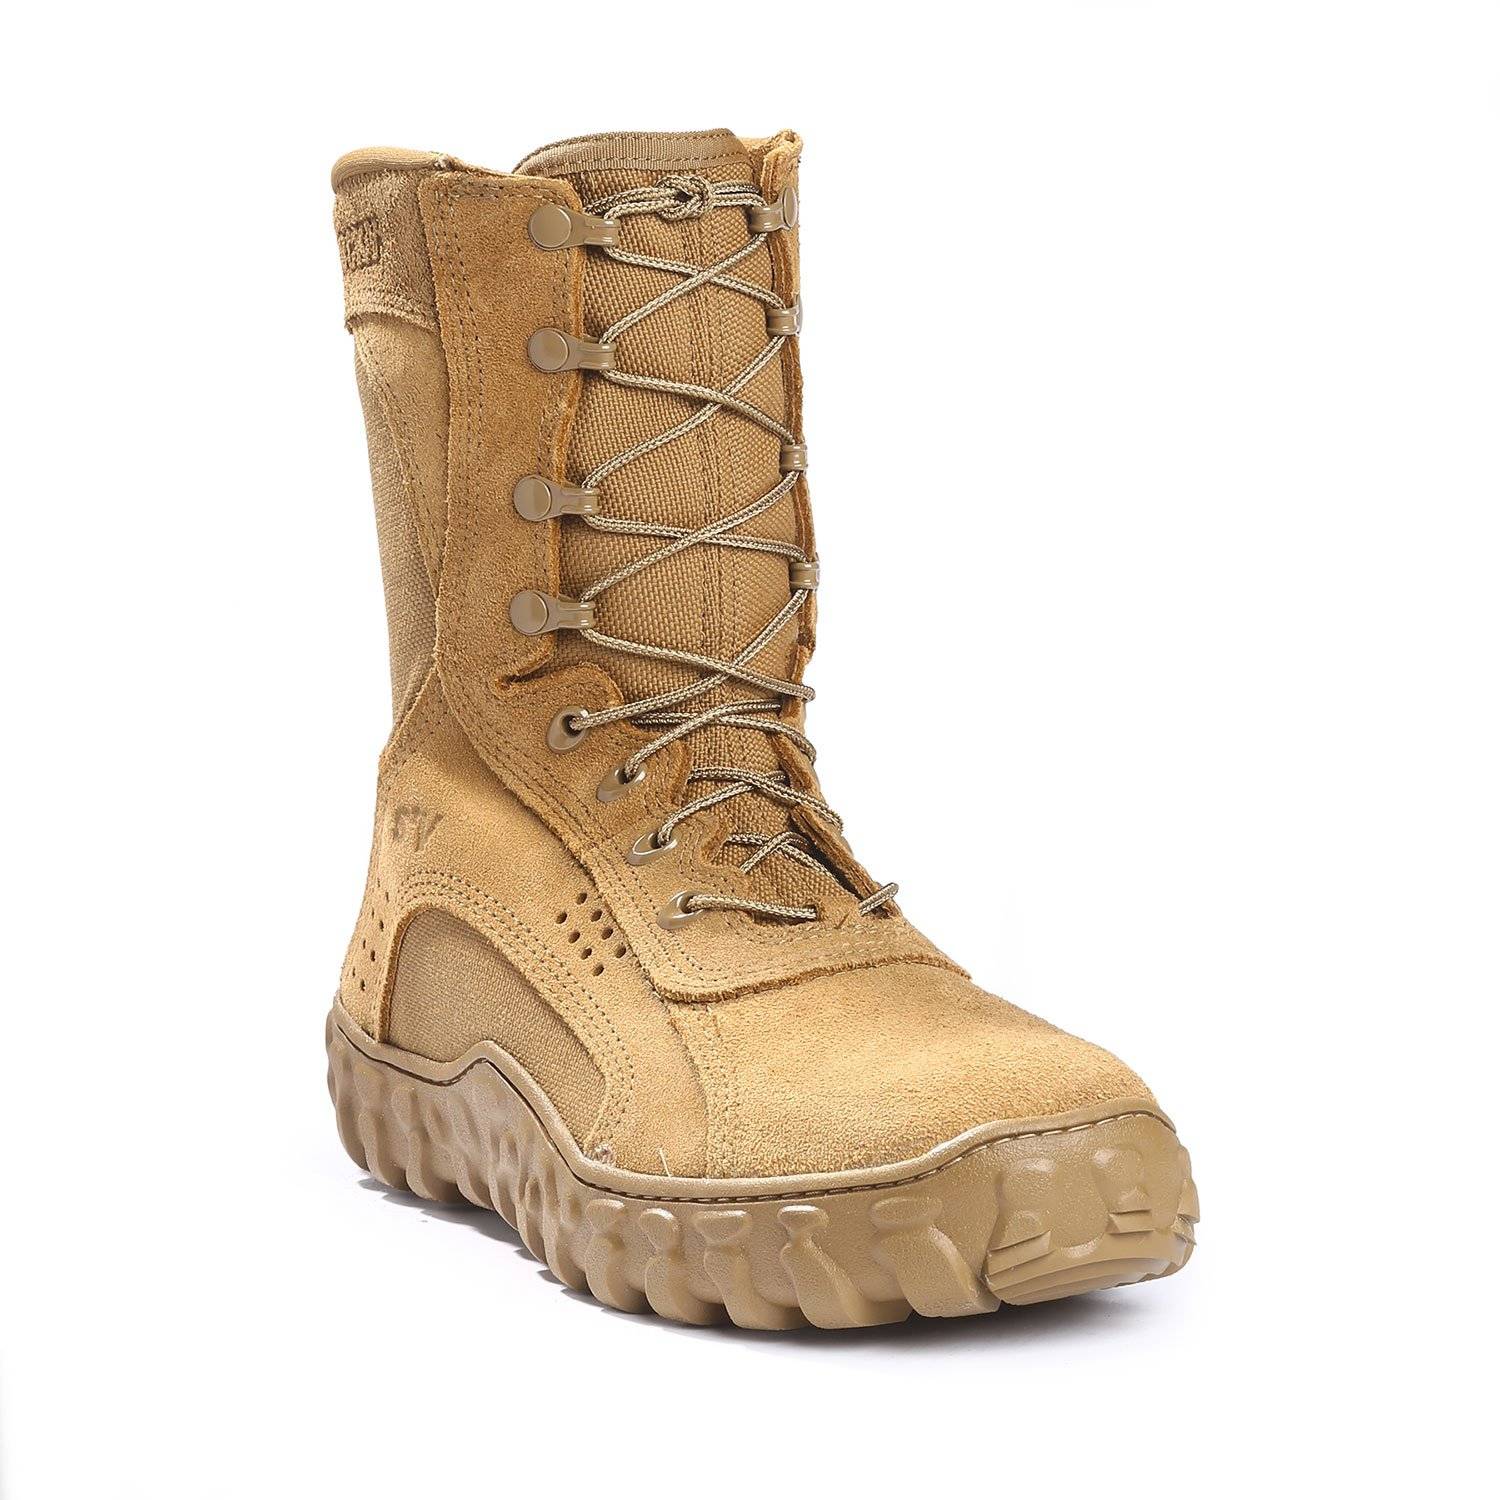 Rocky S2V Hot Weather Military Boots (104) Coyote Brown / Wide / 10.5